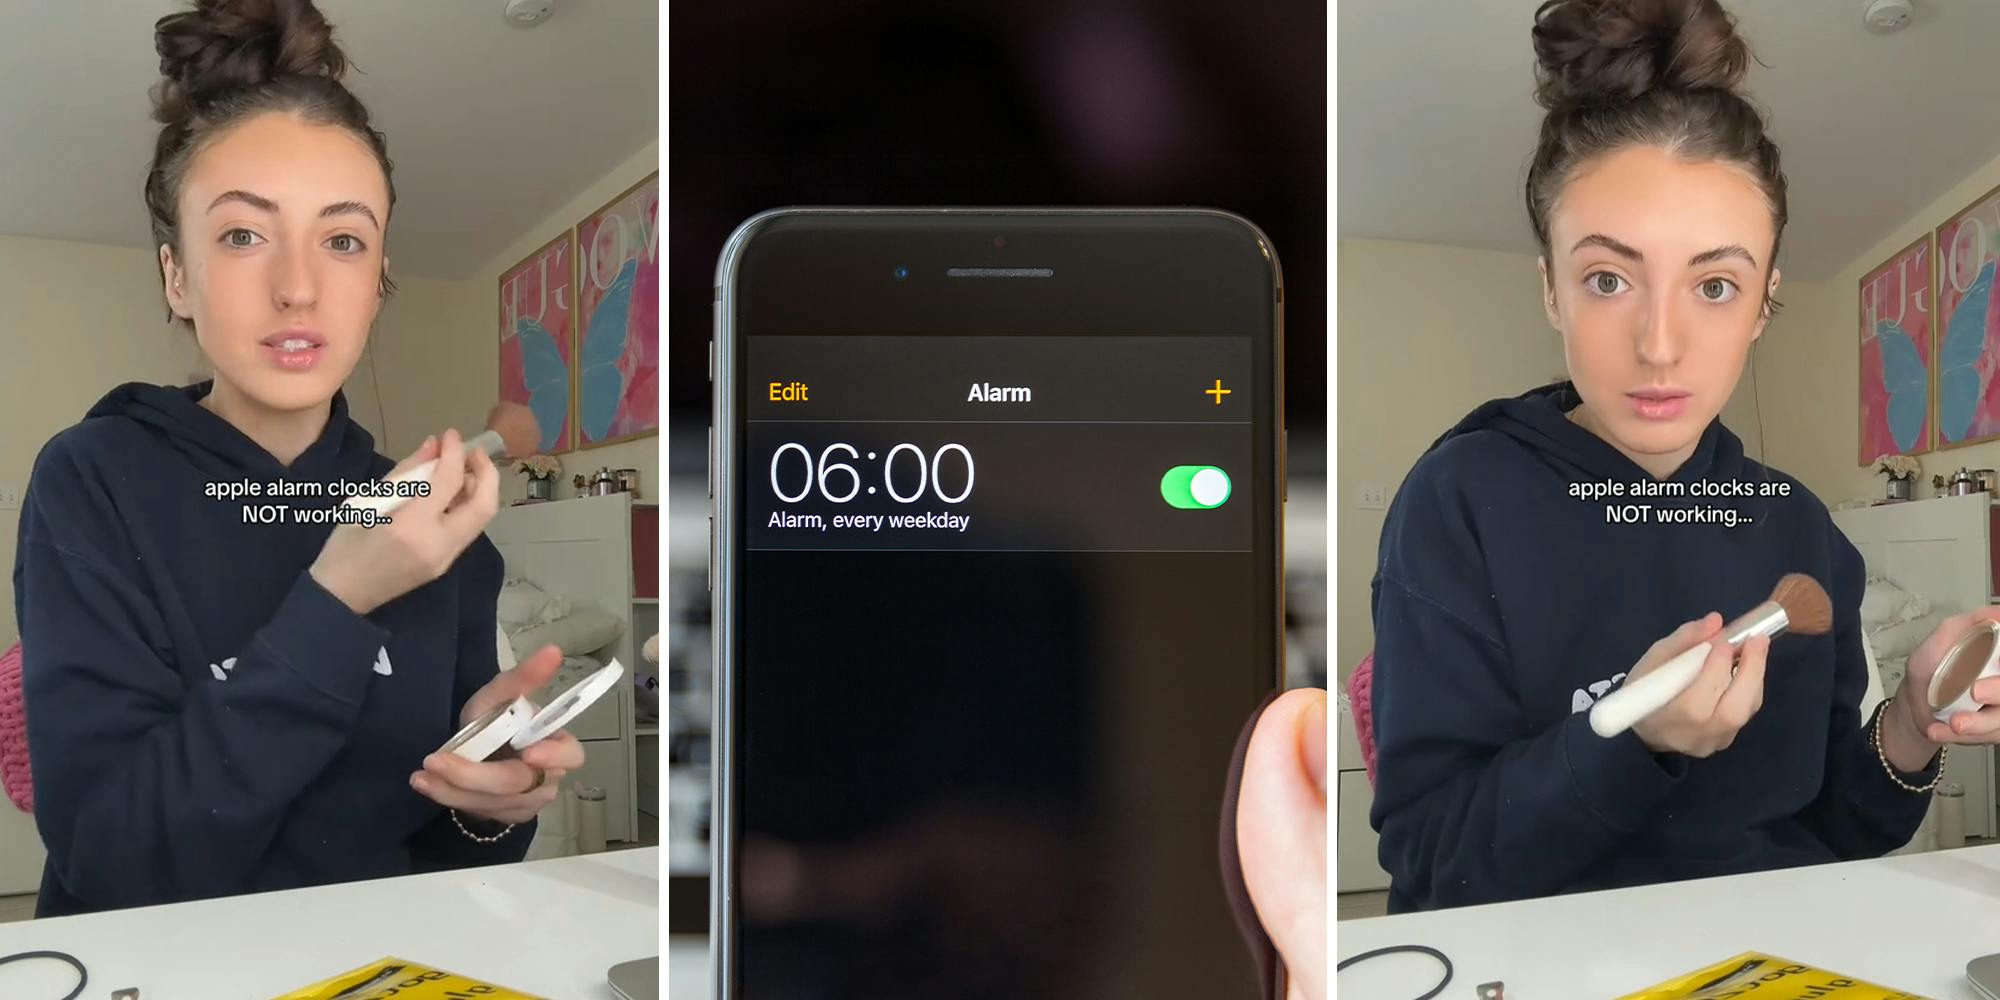 ‘So Apple doesn’t want us to go to work or class?’: Woman says iPhone alarm clock keeps failing to wake her up on time. She’s not the only one